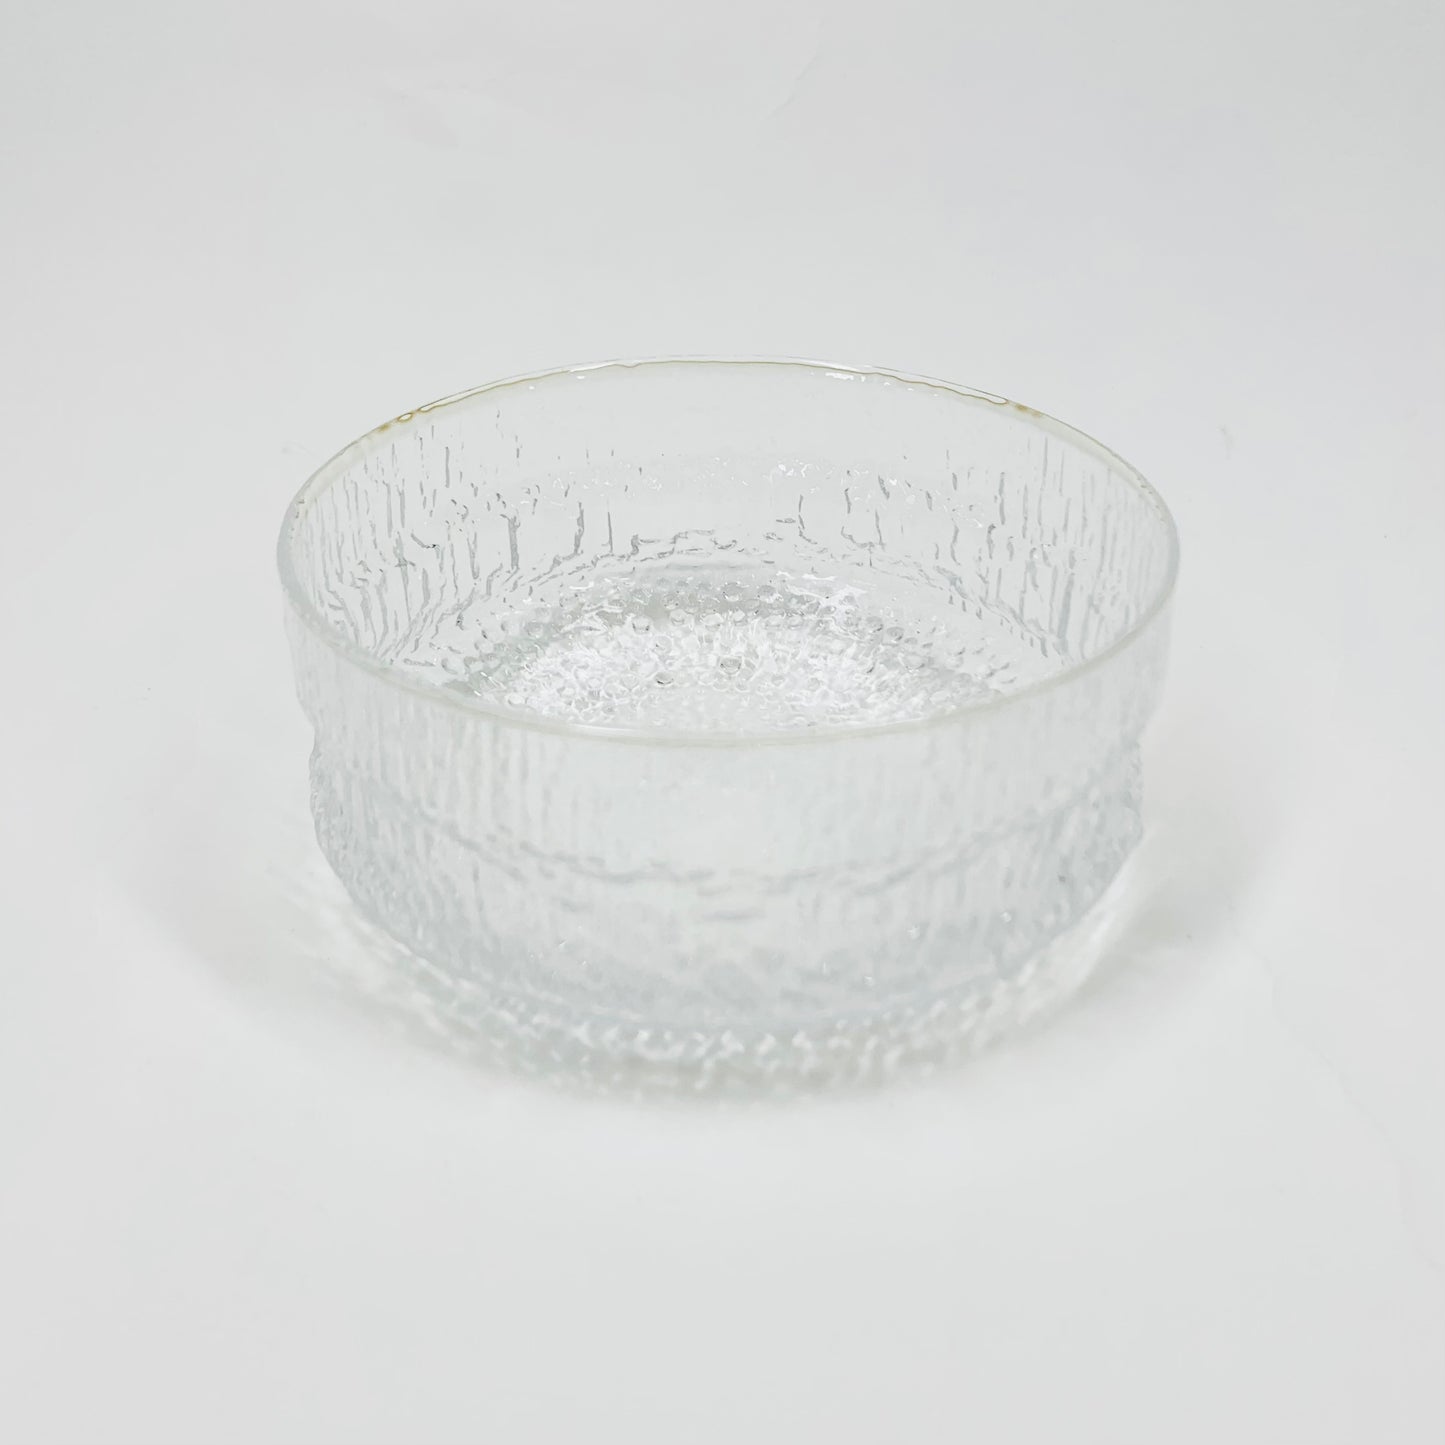 SMALL GLASS BOWL